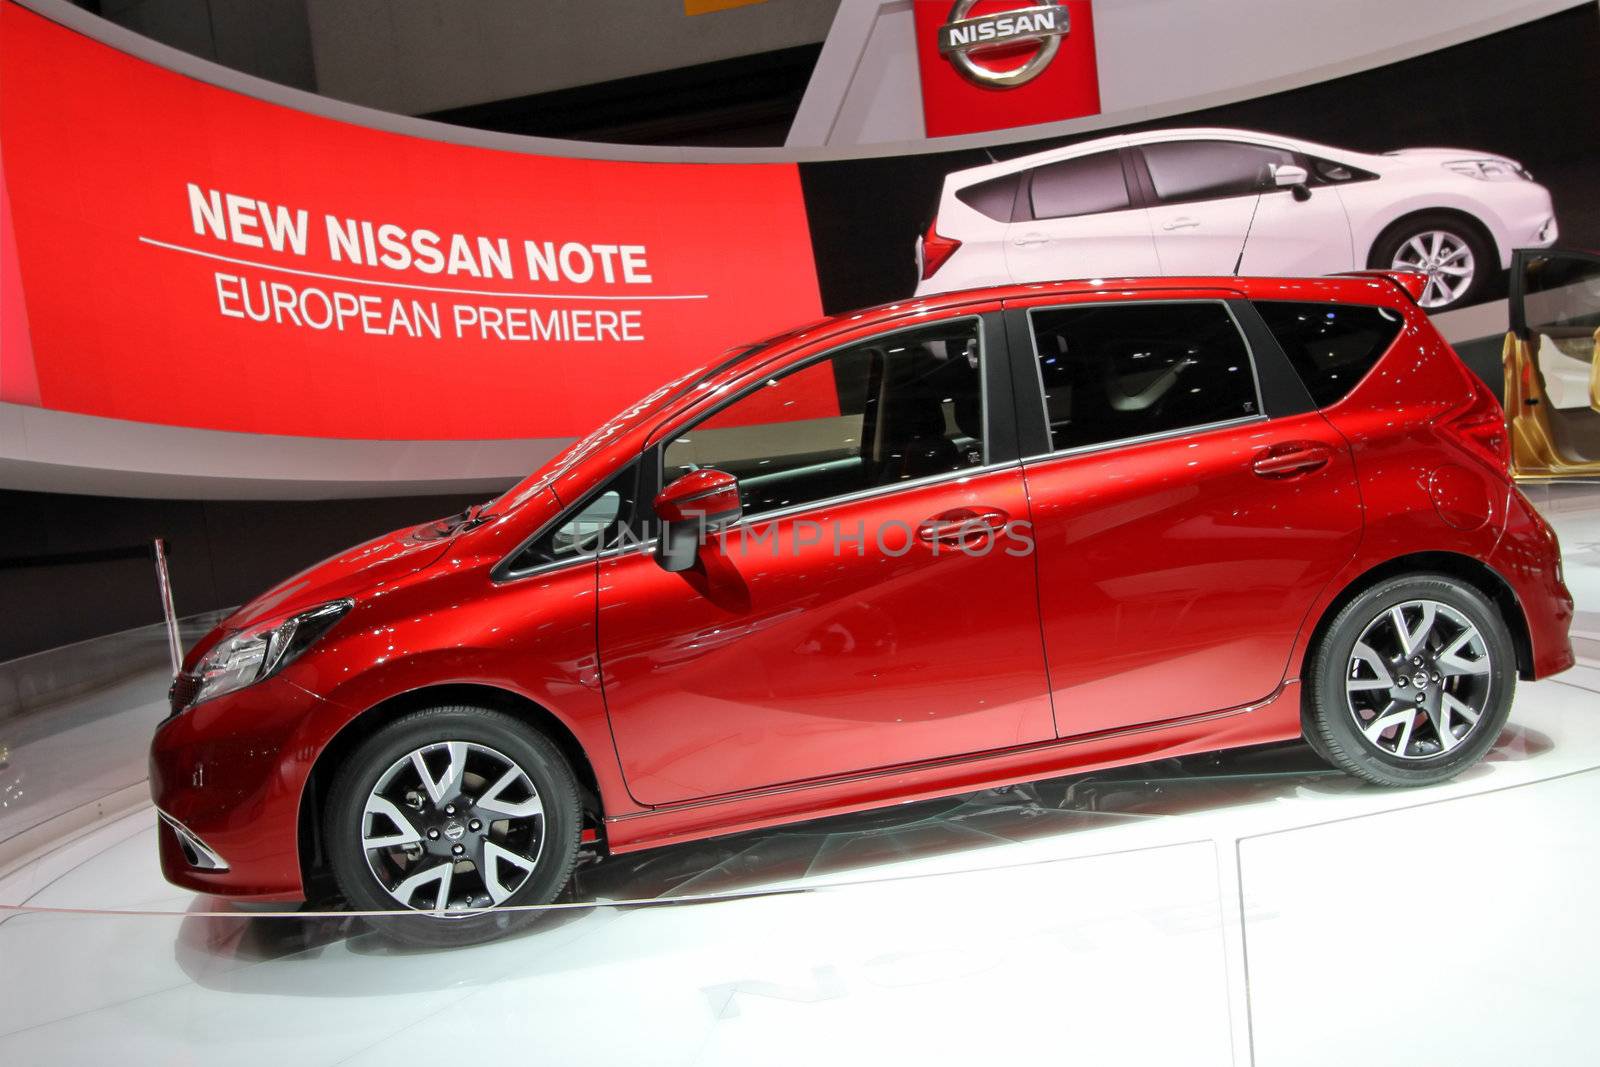 GENEVA - MARCH 8 : red nissan note car on display at the 83st International Motor Show Palexpo - Geneva on March 8, 2013 in Geneva, Switzerland.